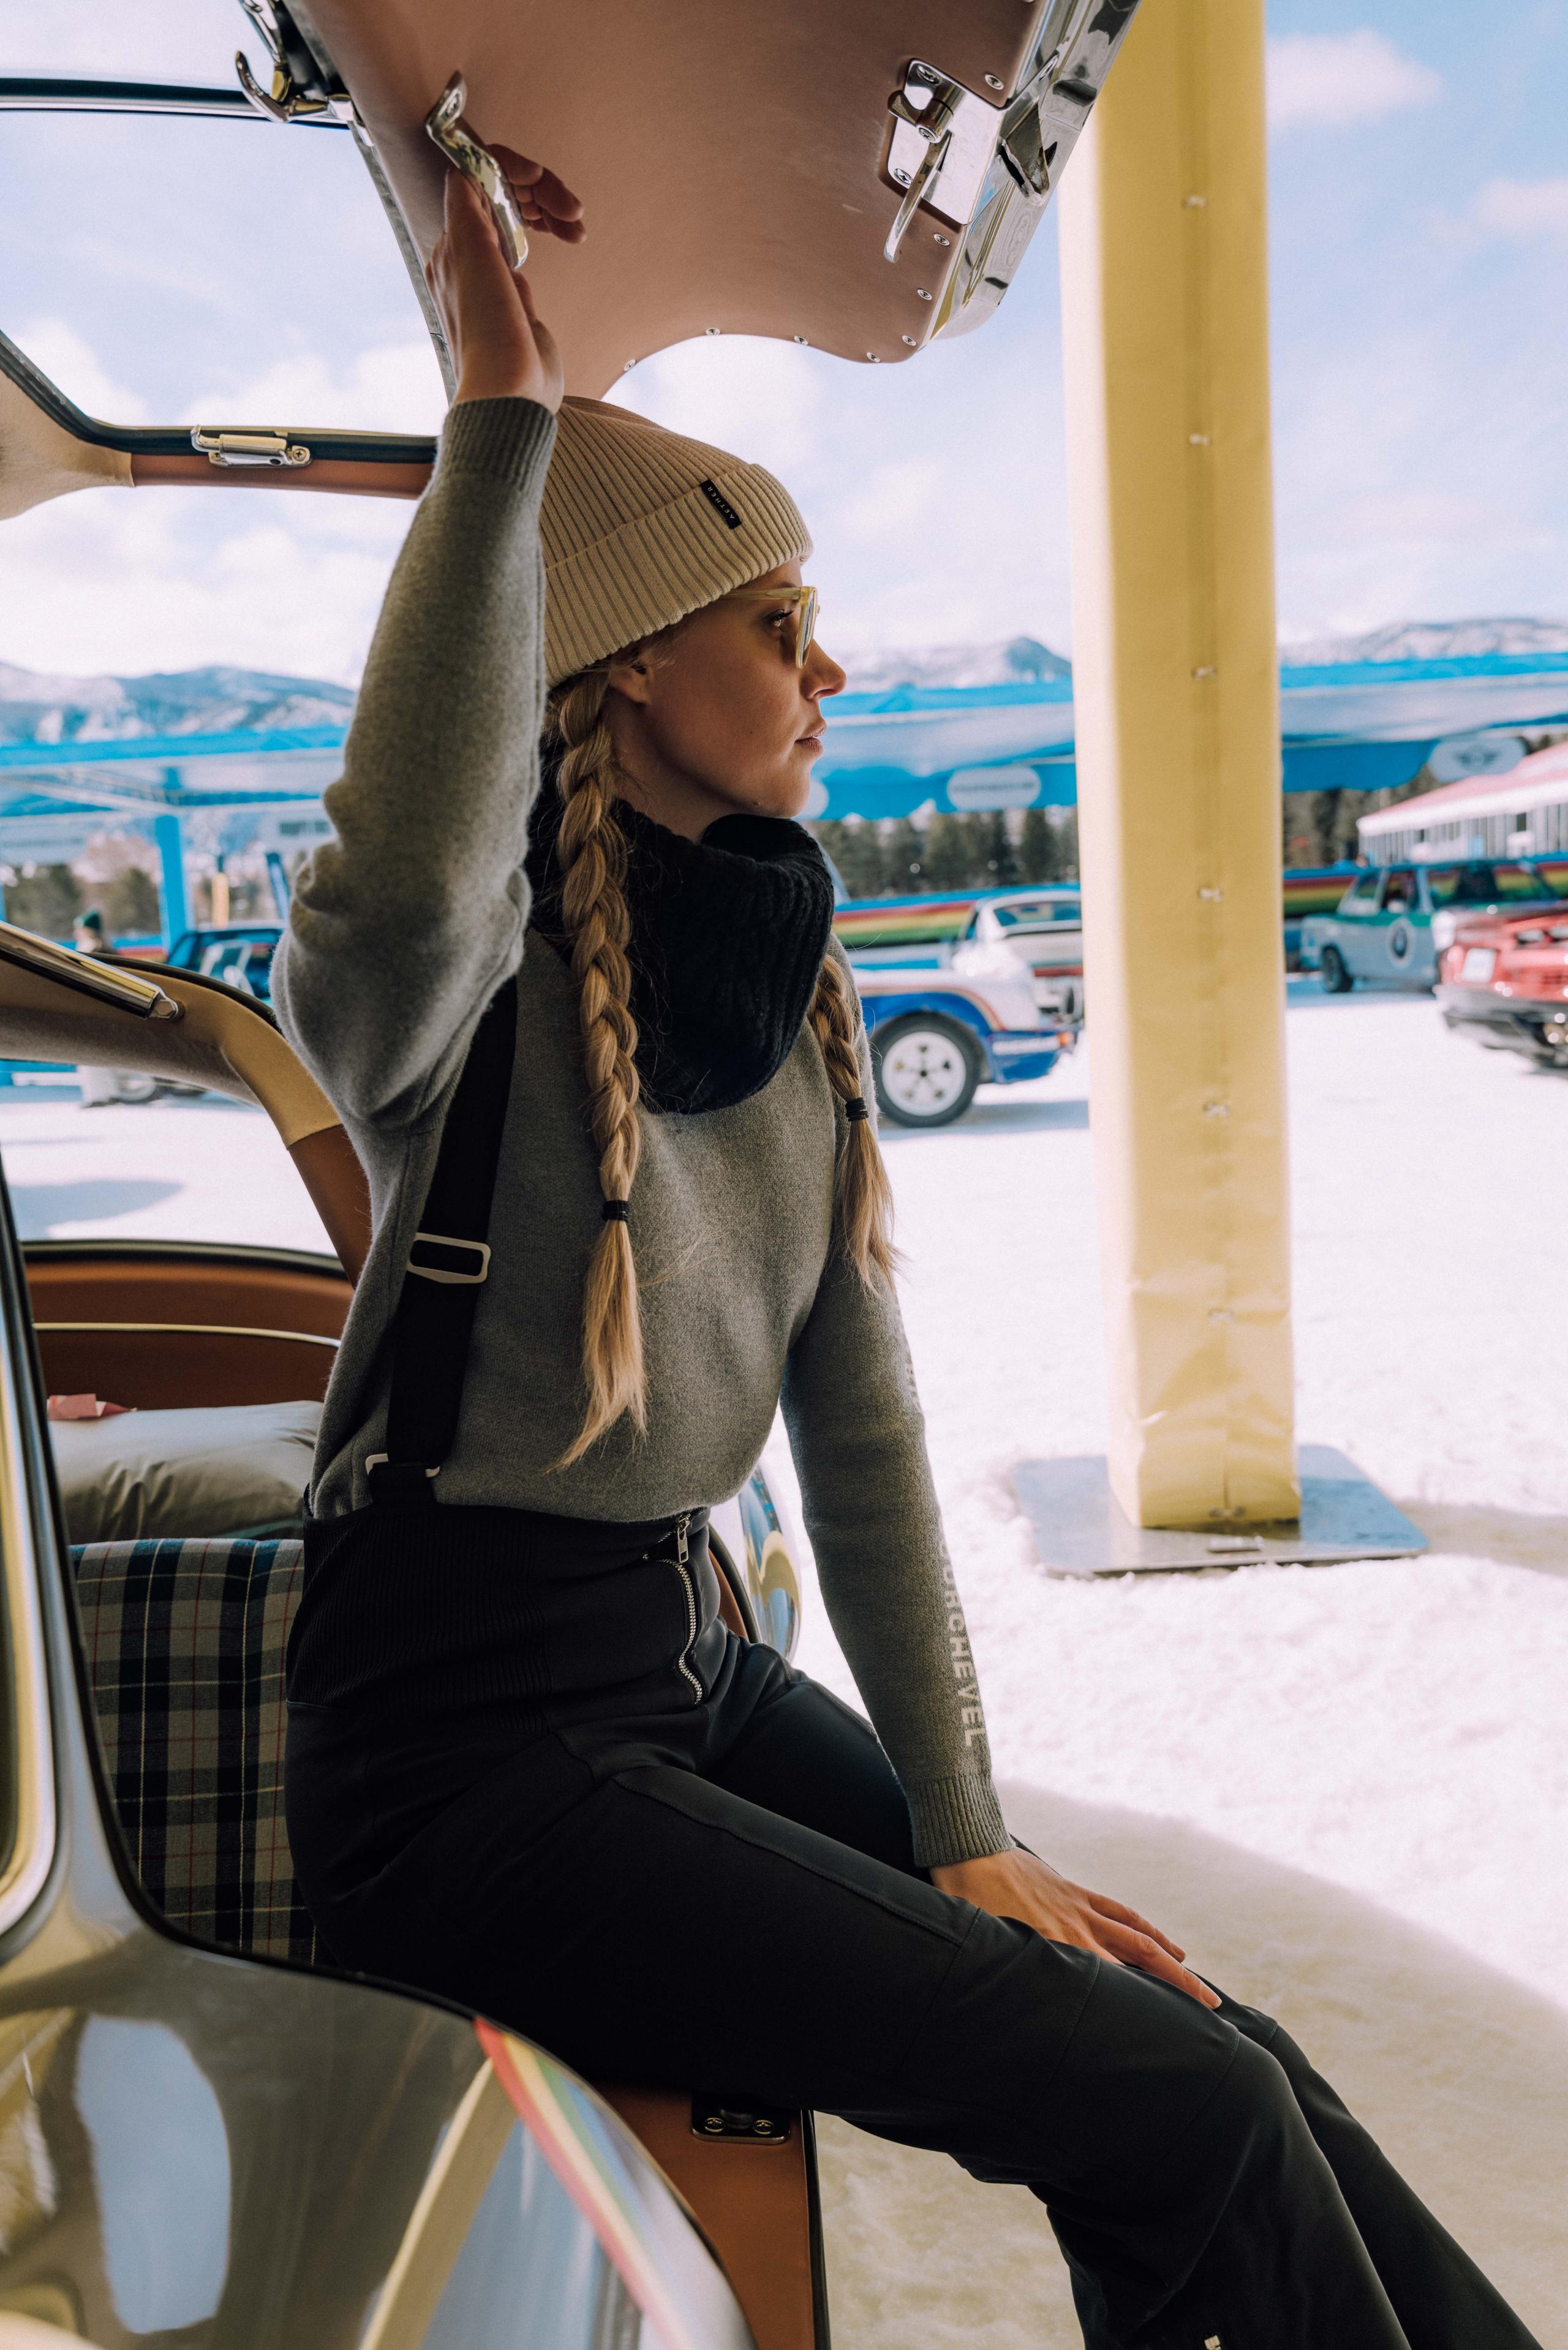 Woman wearing Aether sweater and snow bib sitting on back of vintage car